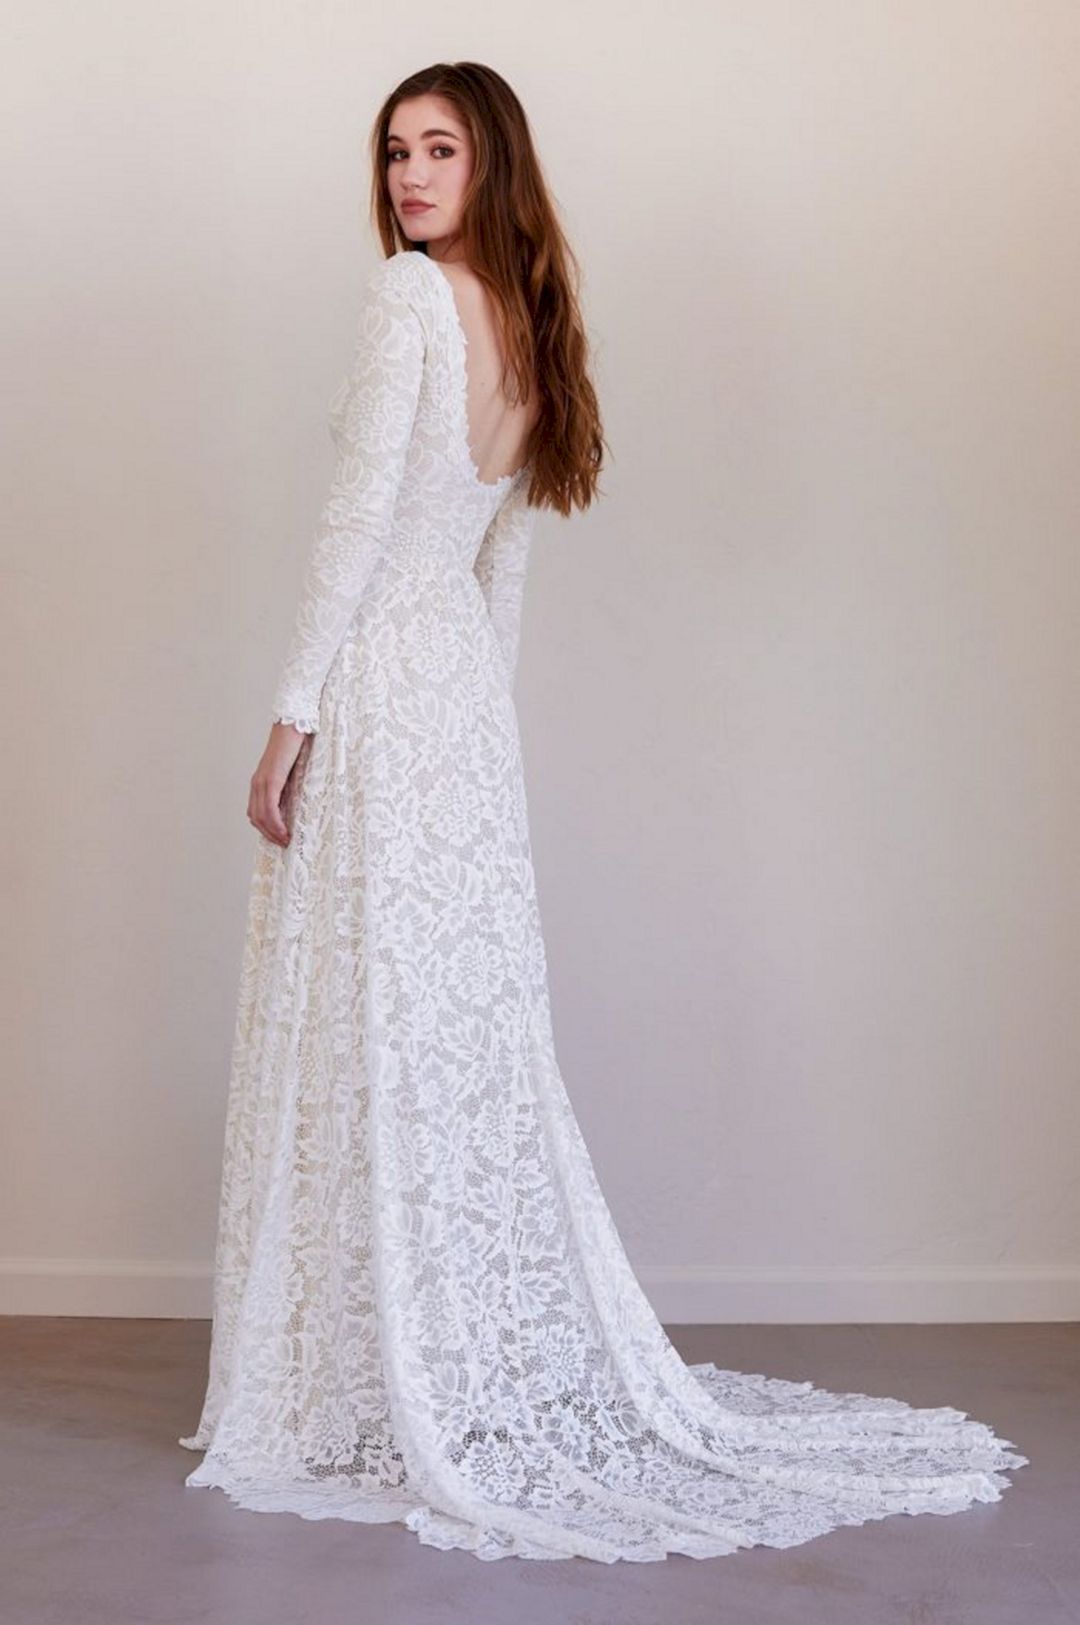 Lace long sleeve wedding dress from chicvintagebrides